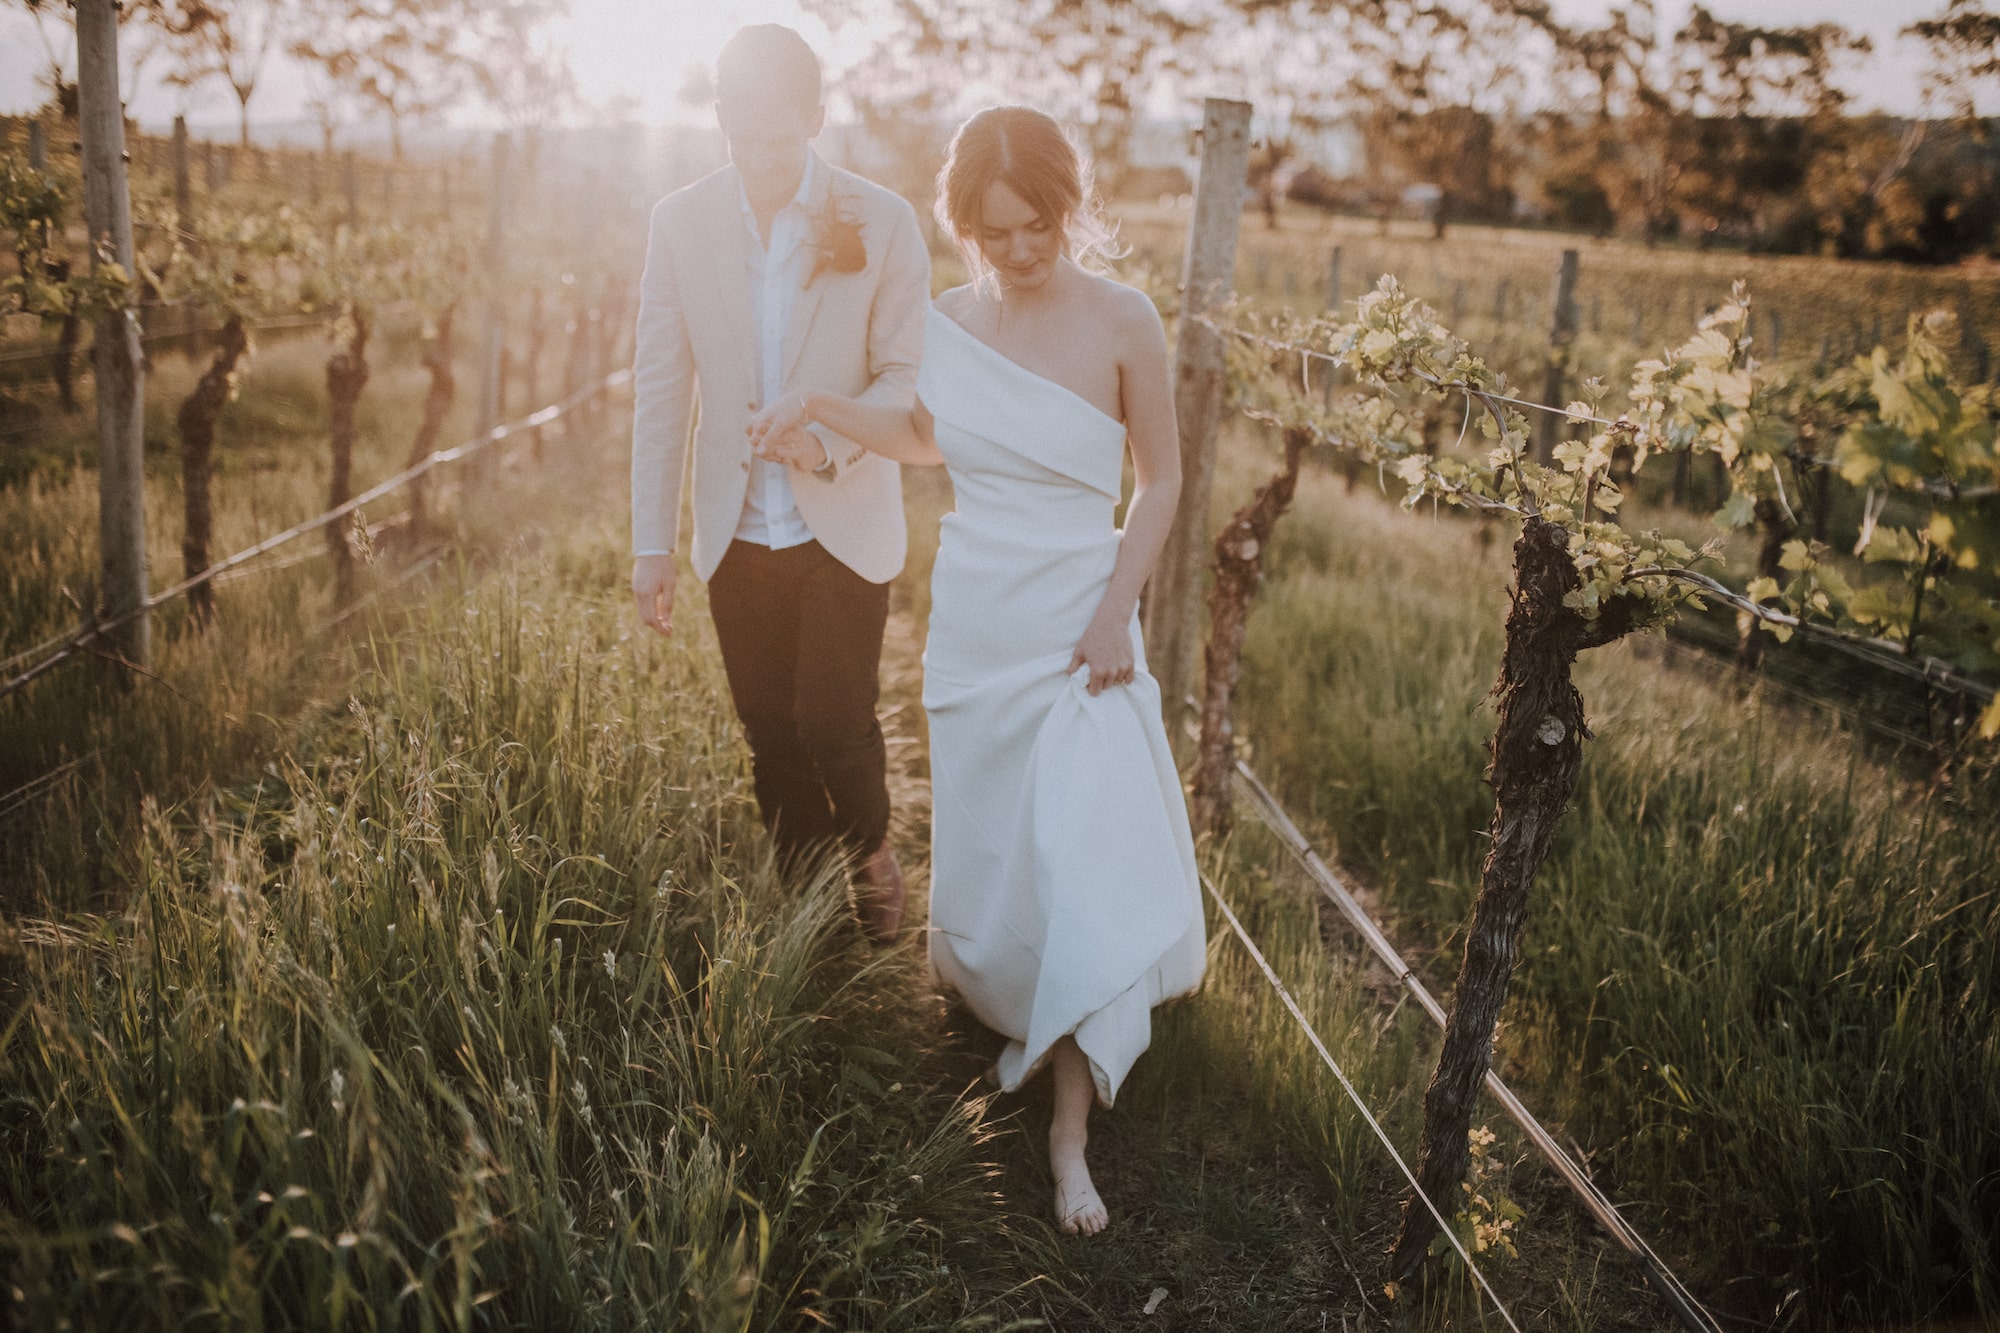 Bride and groom walking hand in hand through vineyard with evening sunlight in the background